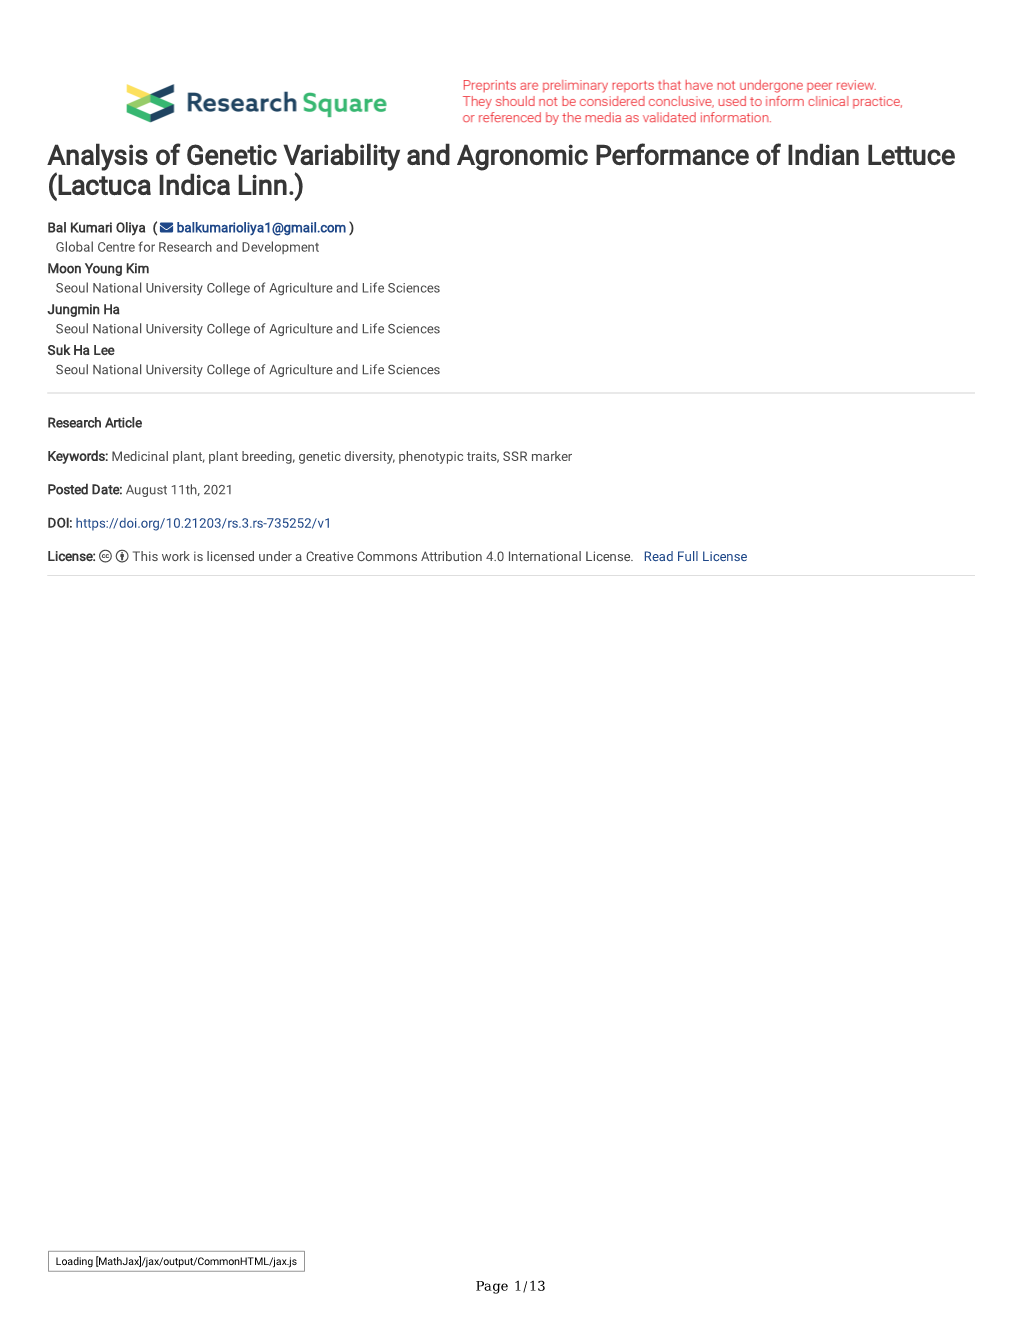 Analysis of Genetic Variability and Agronomic Performance of Indian Lettuce (Lactuca Indica Linn.)